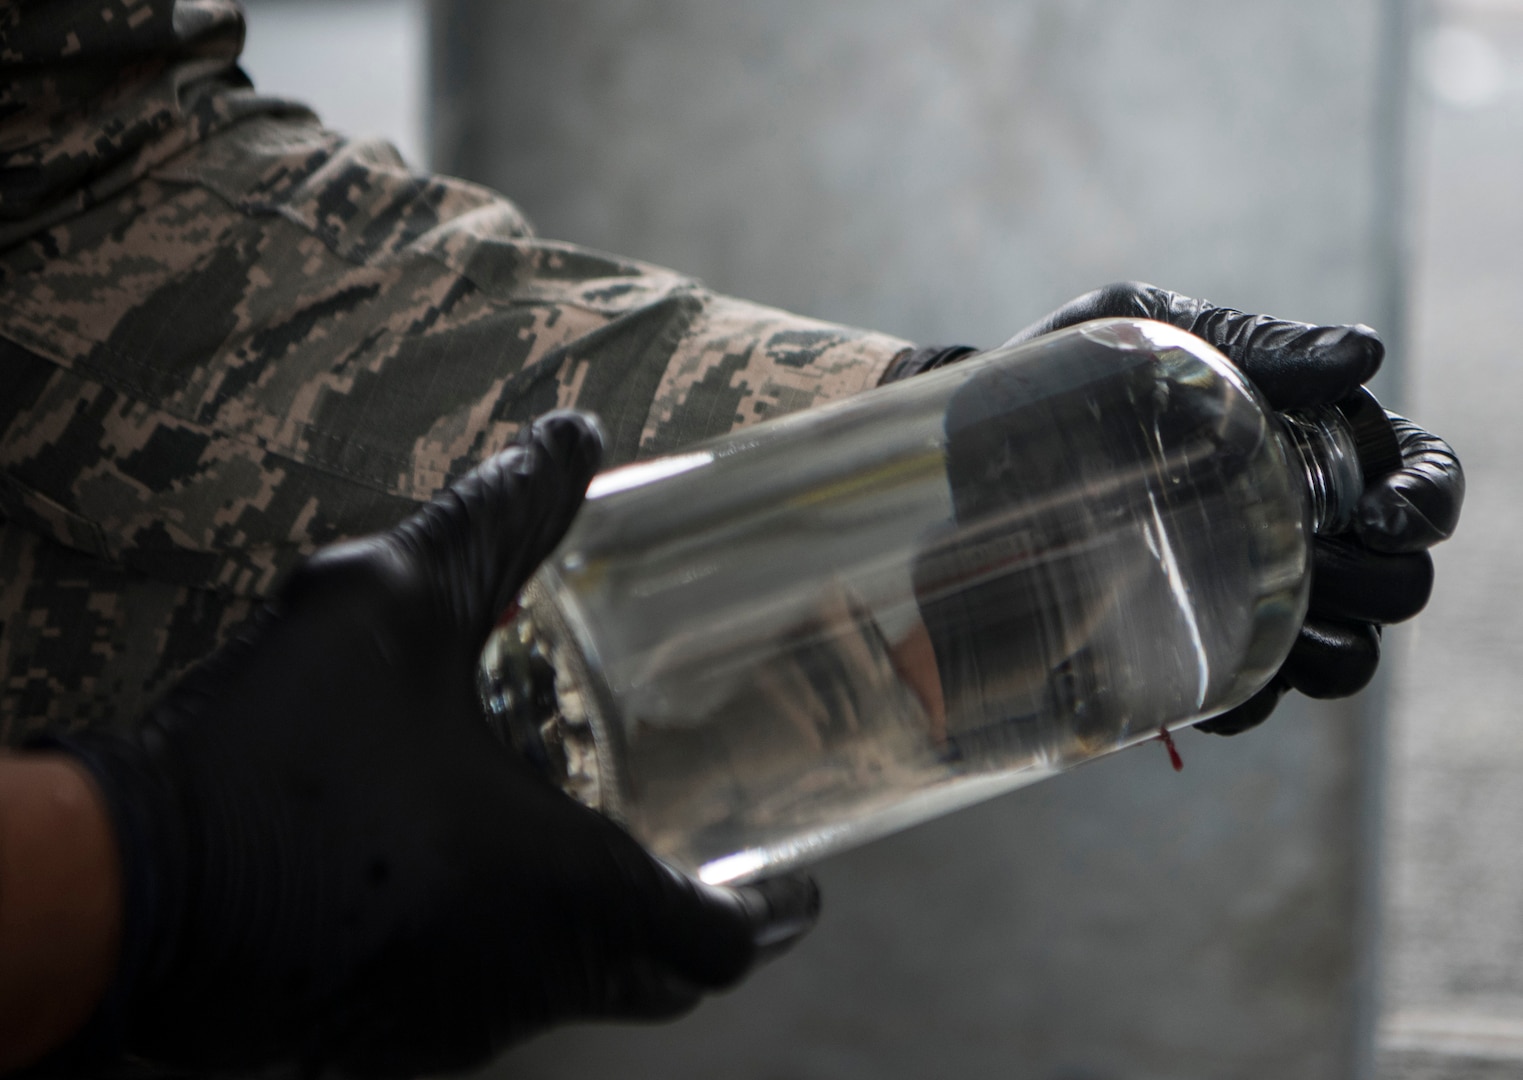 U.S. Air Force Senior Airman Jherron Parks-Harris, a 673d Logistics Readiness Squadron fuels laboratory technician, re-labels a quart jar at a tank truck offload facility on Joint Base Elmendorf-Richardson, Alaska, July 25, 2019. The TTOF became fully operational December 2018, and provides a secondary means to receive JP-8 (Jet Propellant 8) in the event JBER’s fuel pipelines are out of service due to maintenance, damage or natural disaster.